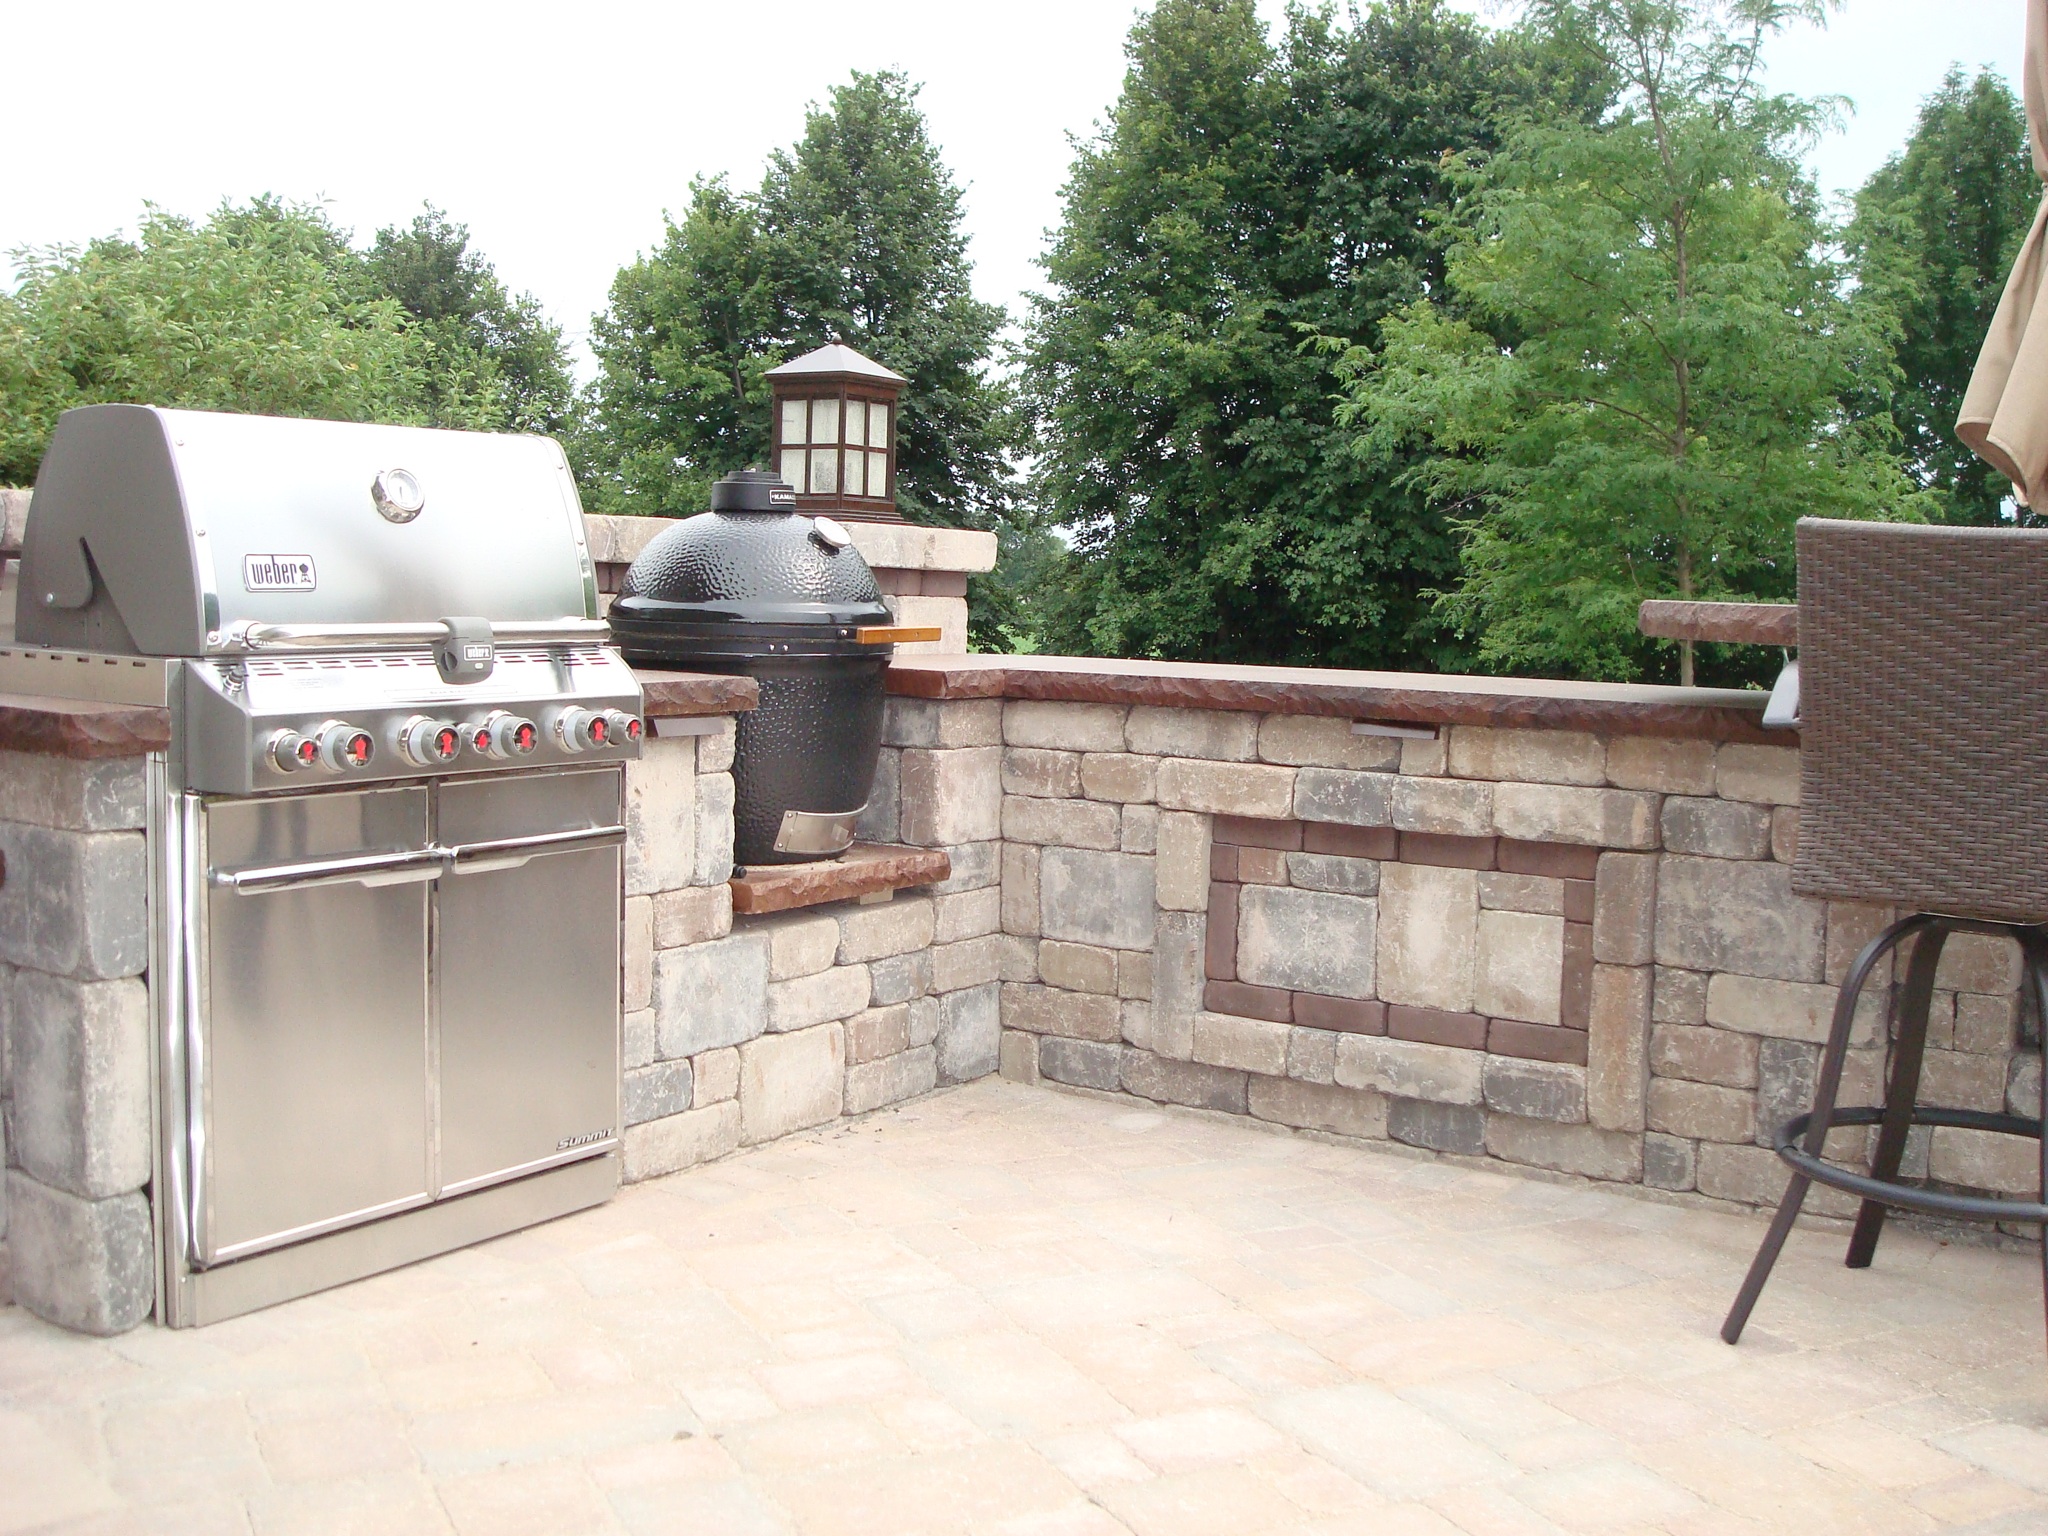 large grill with smoker in retaining wall on patio